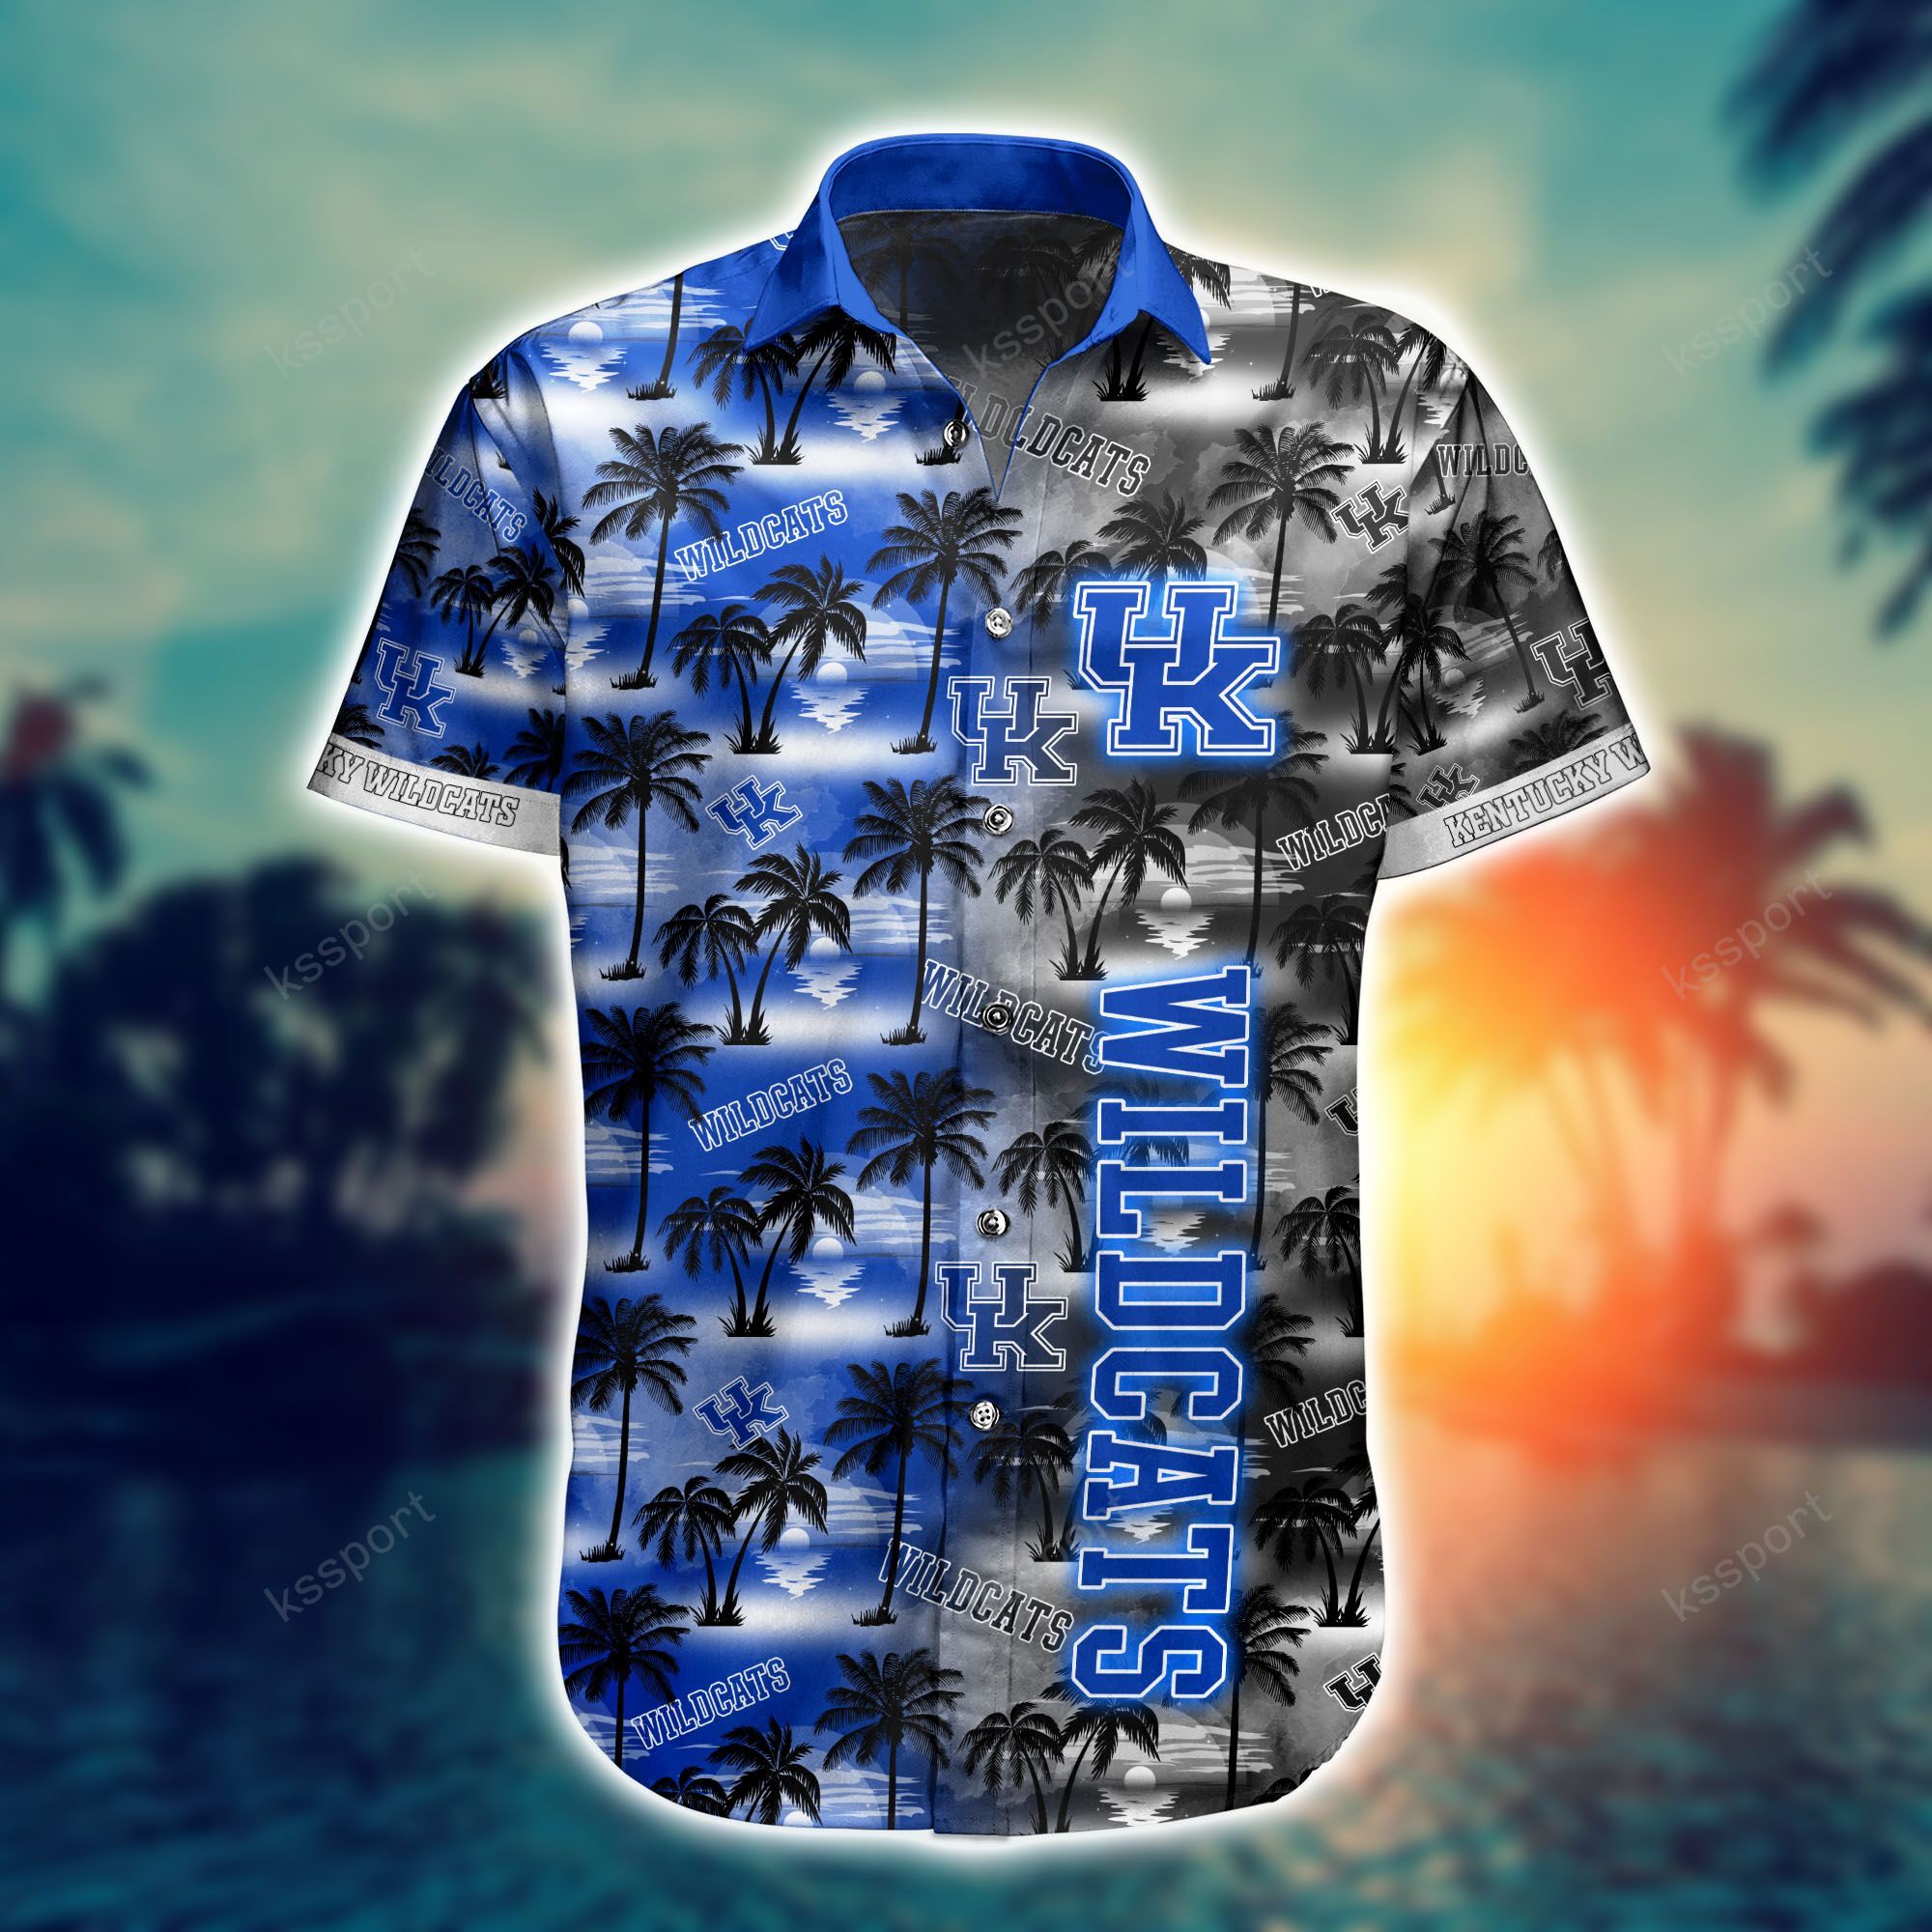 Top cool Hawaiian shirt 2022 - Make sure you get yours today before they run out! 142